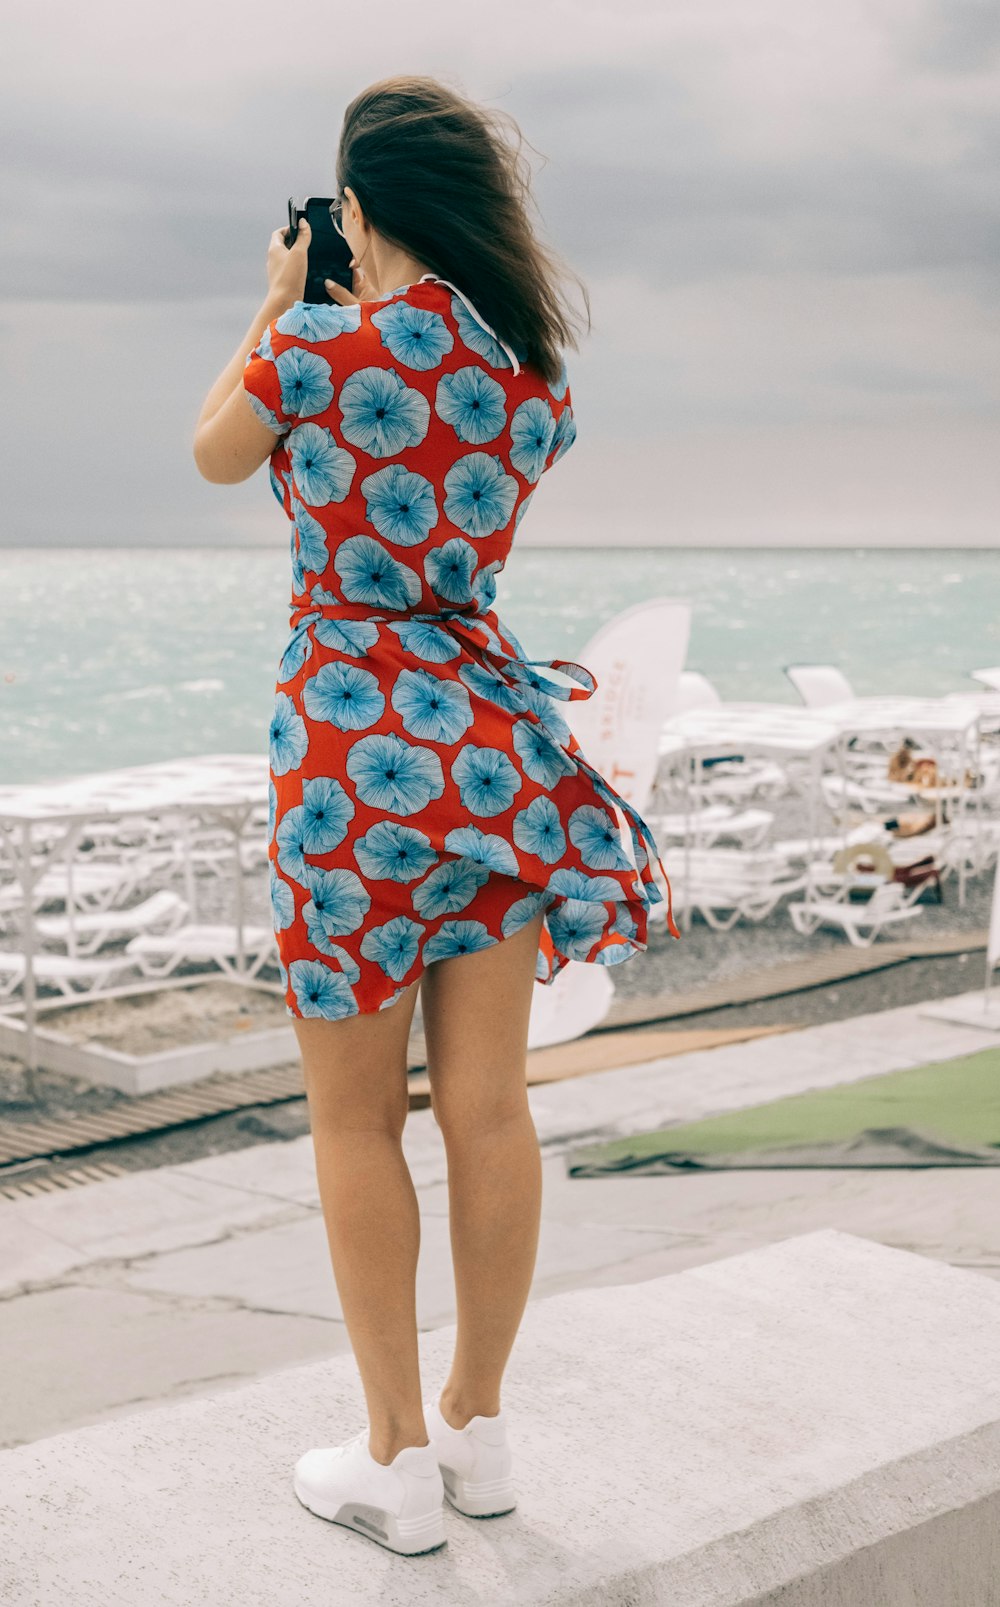 woman wearing maroon and blue floral dress holding phone at daytime